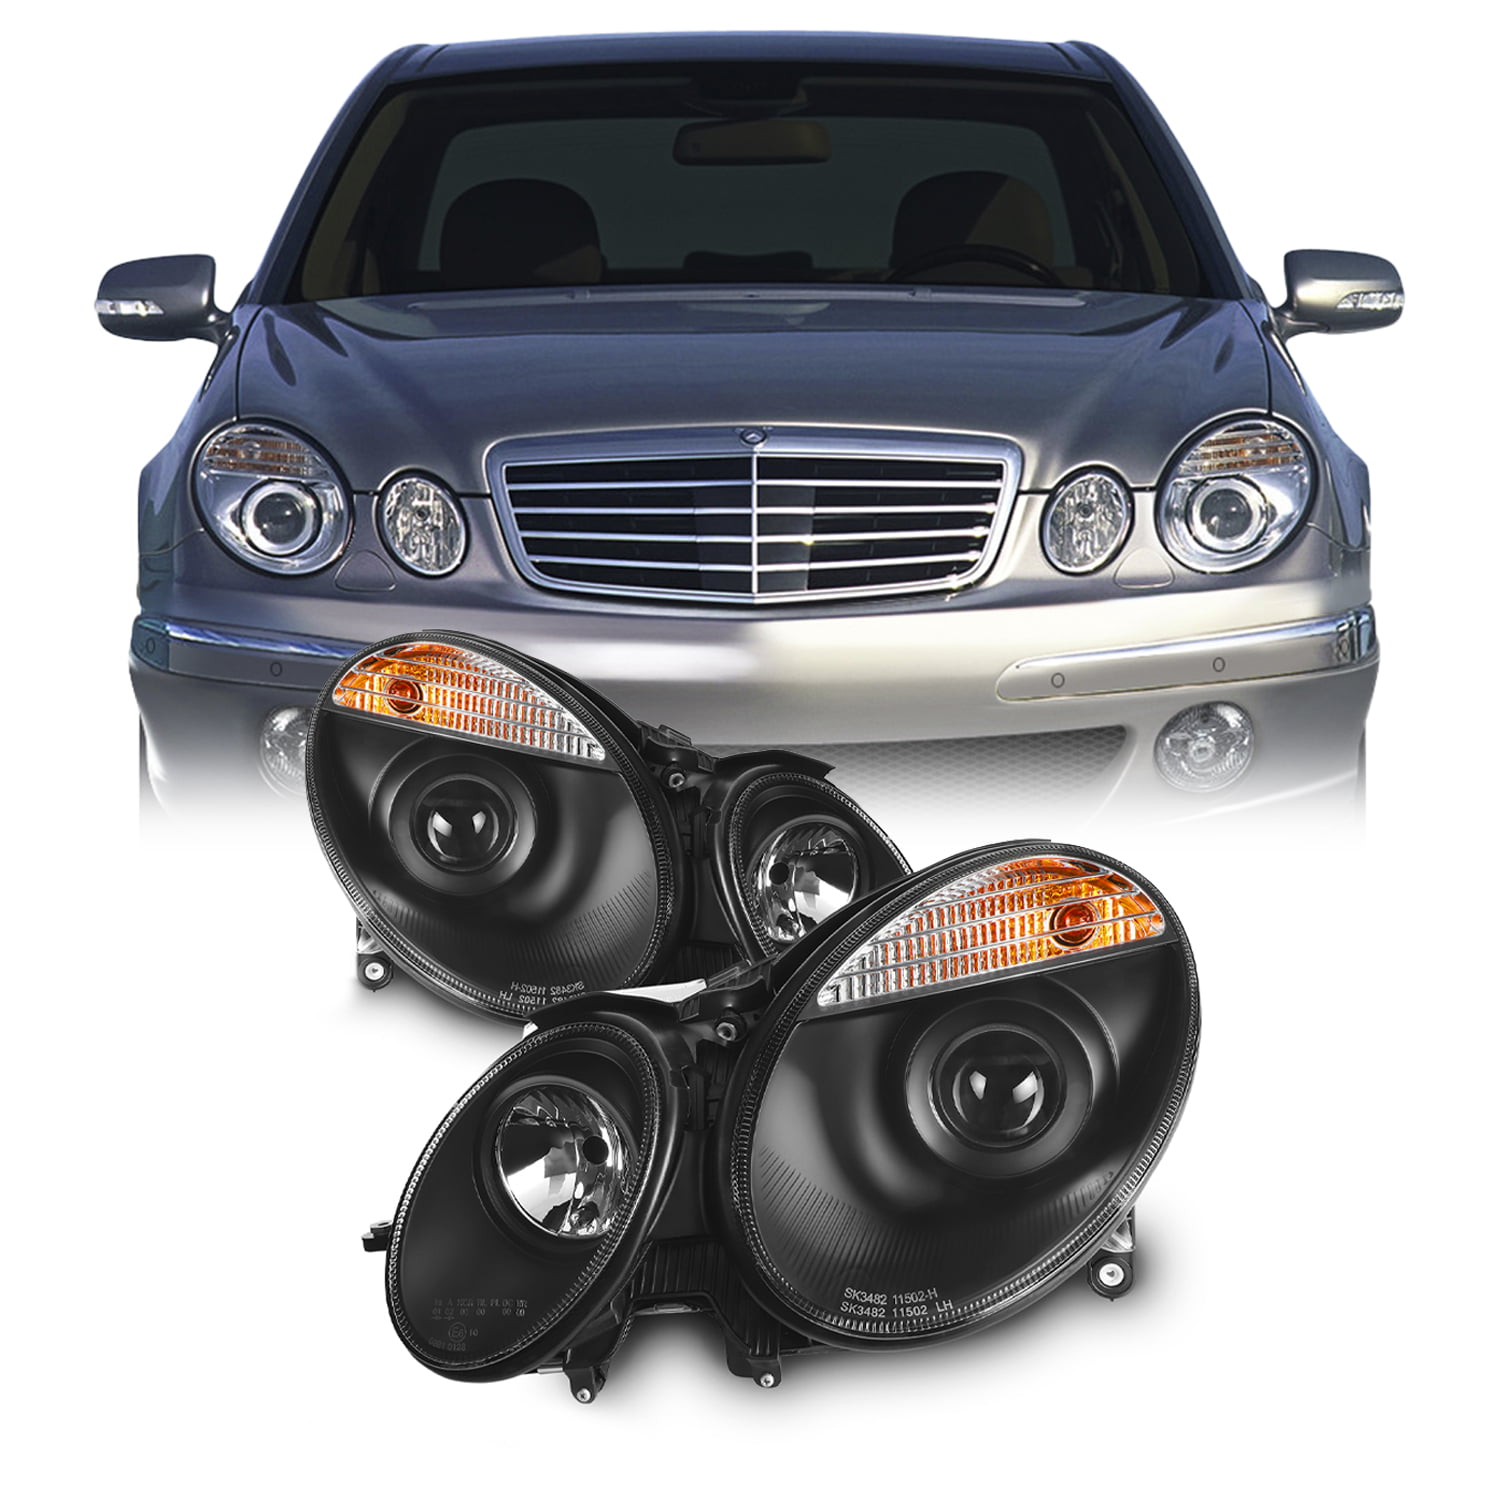  AKKON - For W211 Benz E-Class Halogen Type Black Projector  Headlights Left + Right Side Replacement Pair Set : Automotive